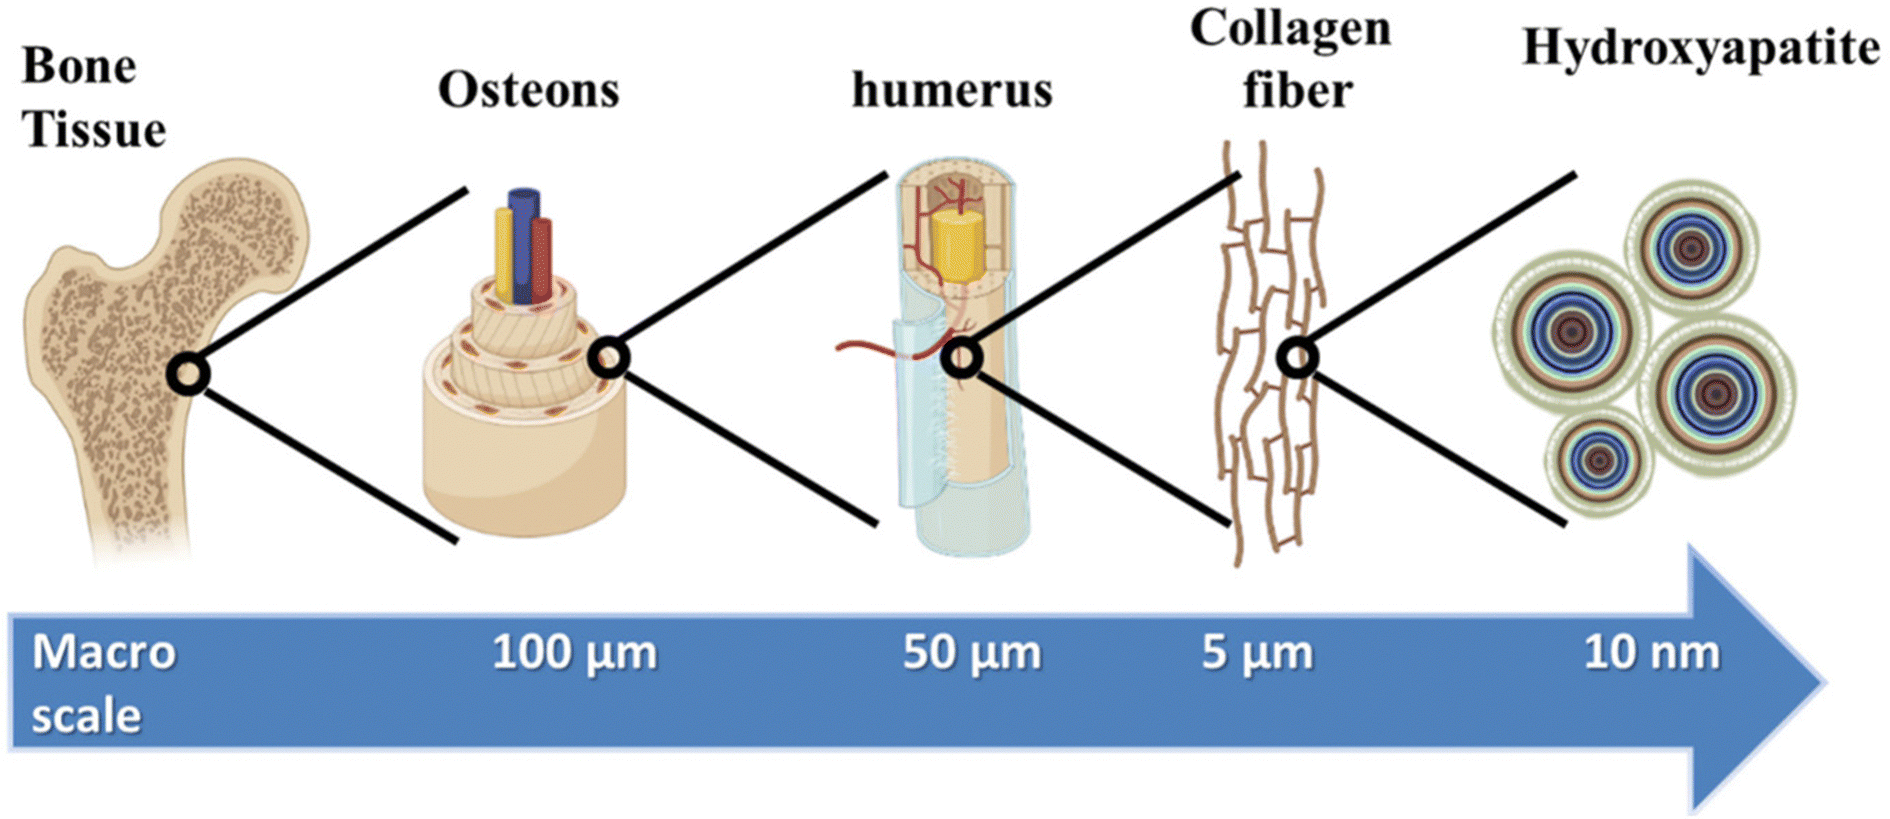 Advances in hydrogels for the treatment of periodontitis - Journal 